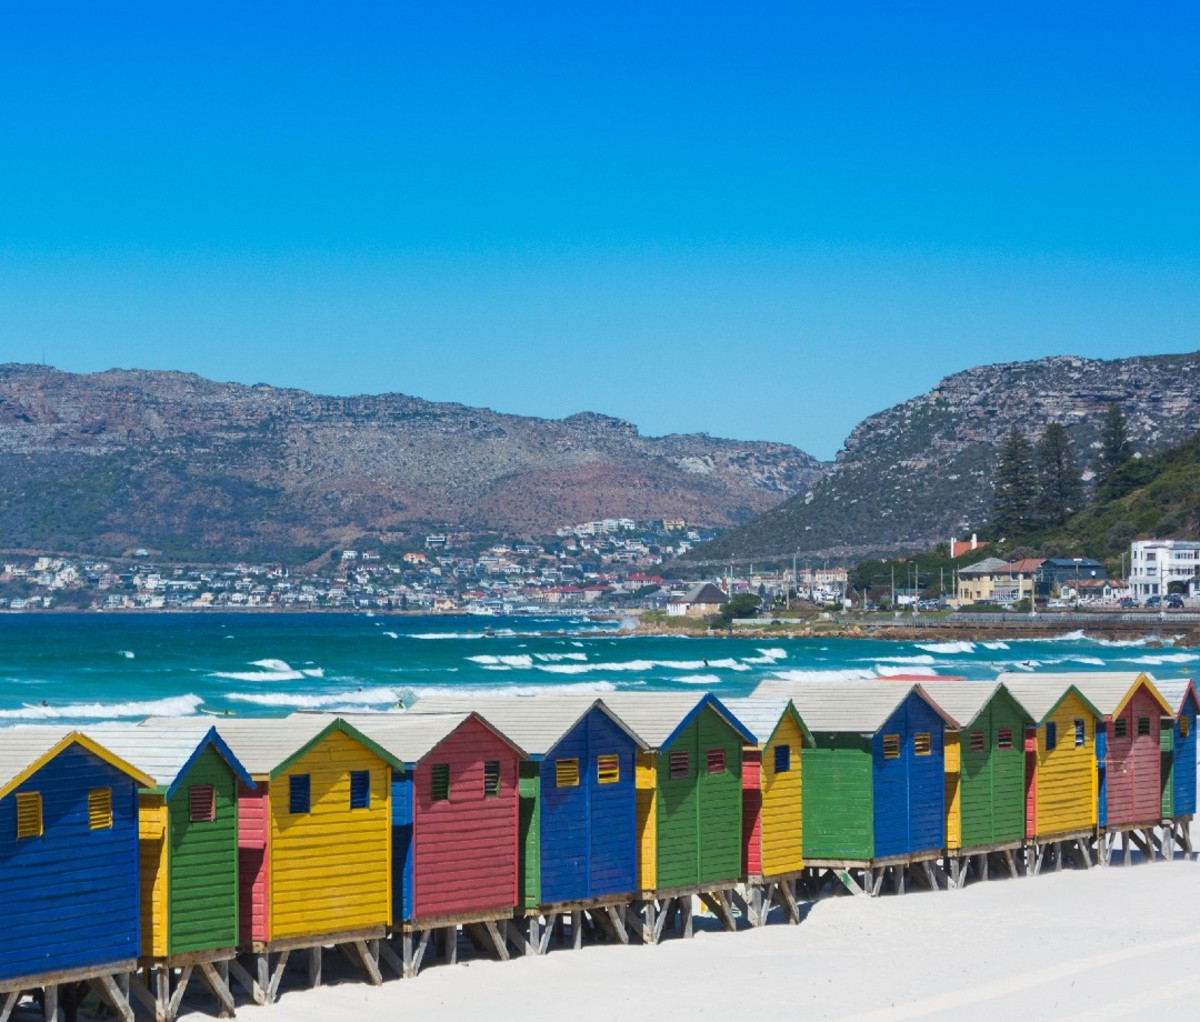 Colorful wooden beach huts on the beach at Muizenberg, Cape Town.